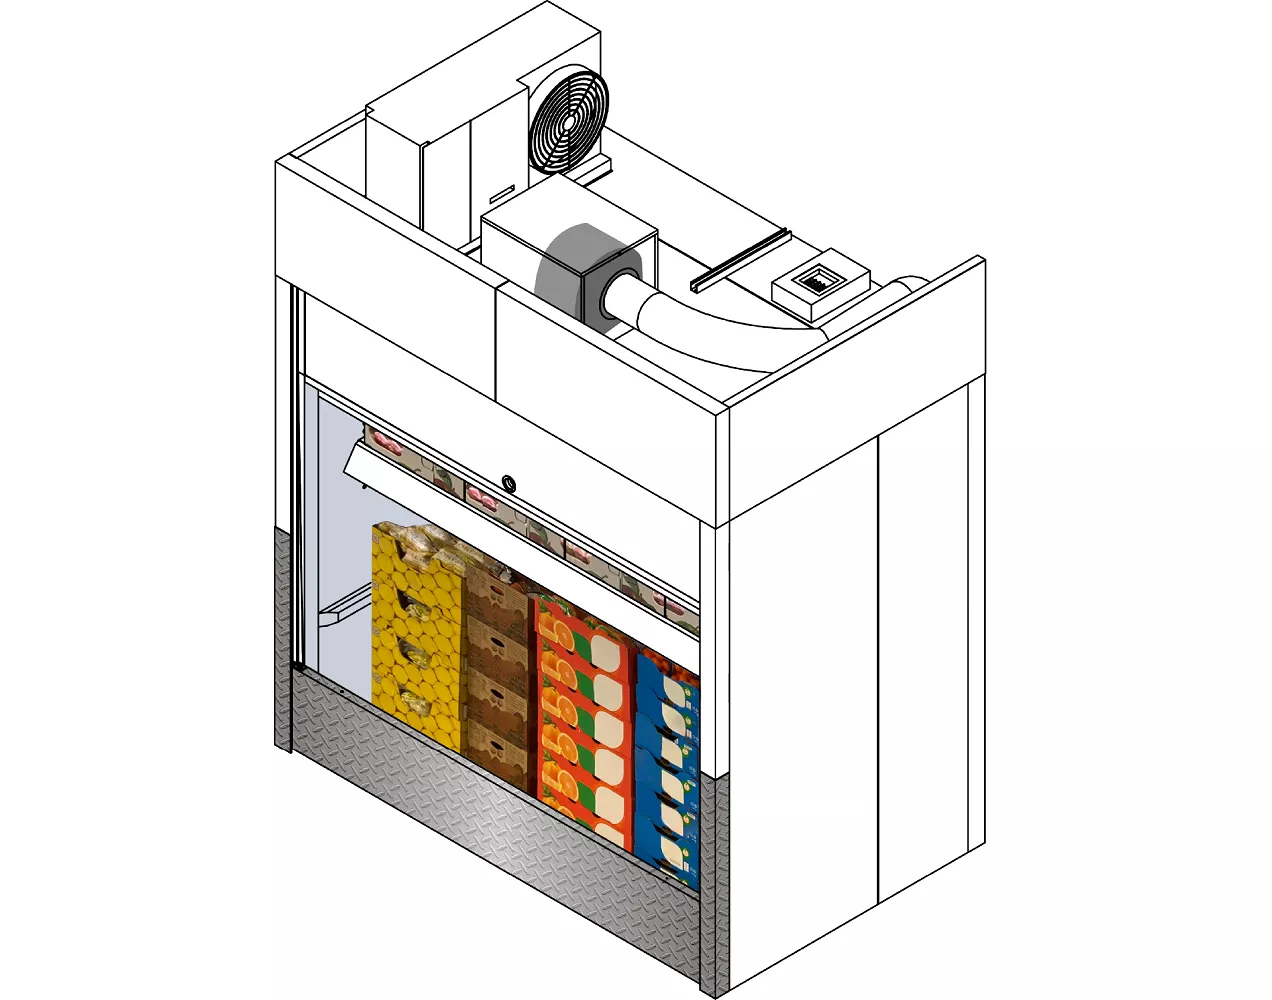 KPS GLOBAL Introduces Accessible Cold Environments as Newest Cold Storage Innovation